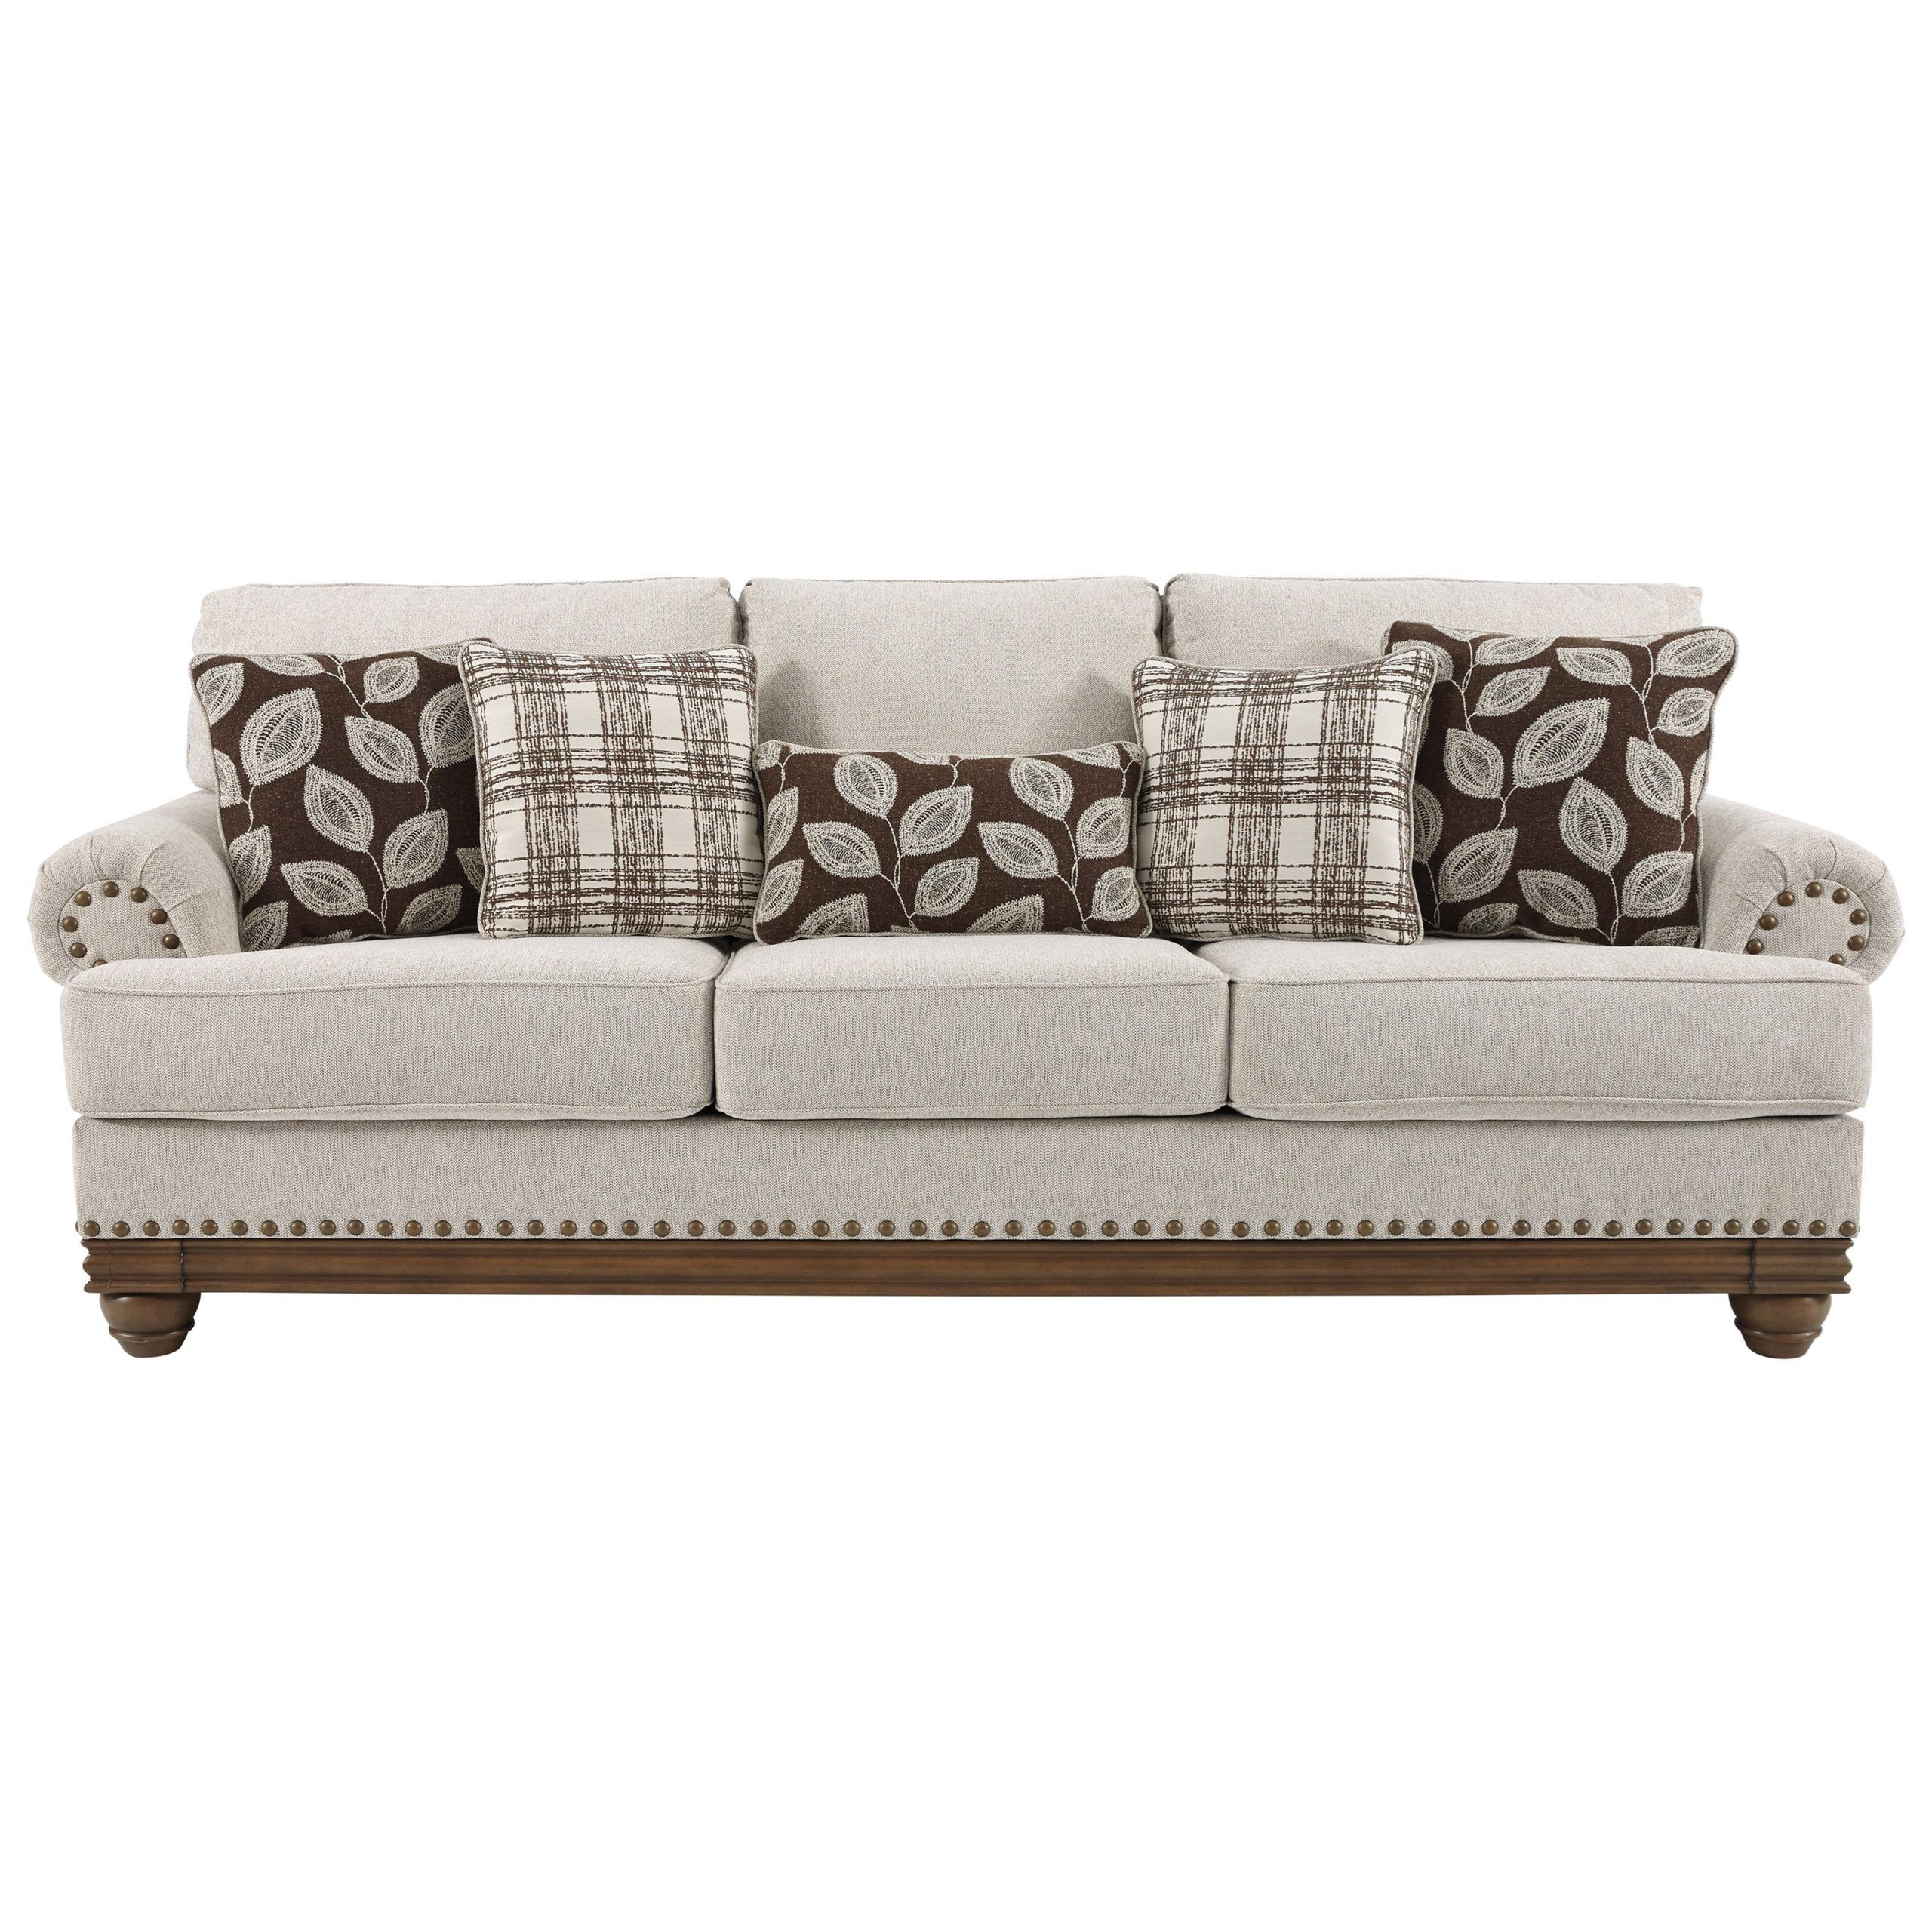 Signature Designashley Harleson 117901 Transitional Sofa With Nailhead  Trim | Factory Direct Furniture | Uph – Stationary Sofas For Sofas With Nailhead Trim (View 6 of 15)